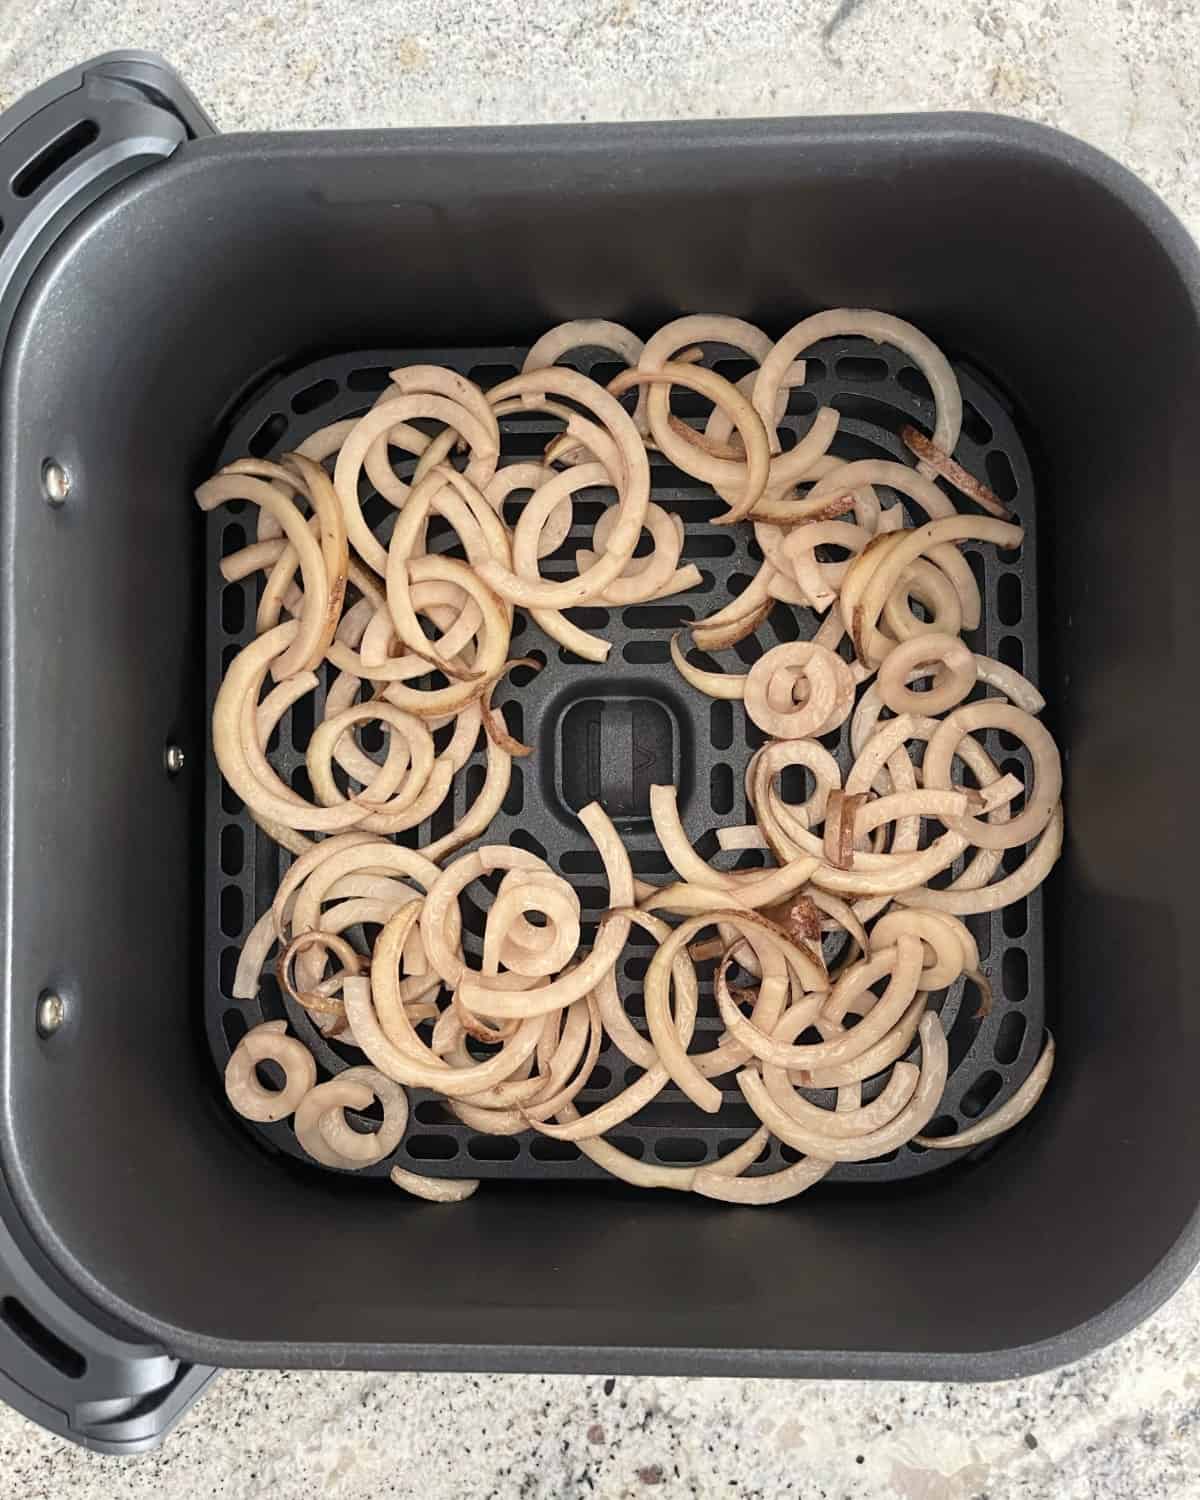 Uncooked curly fries in air fryer basket.